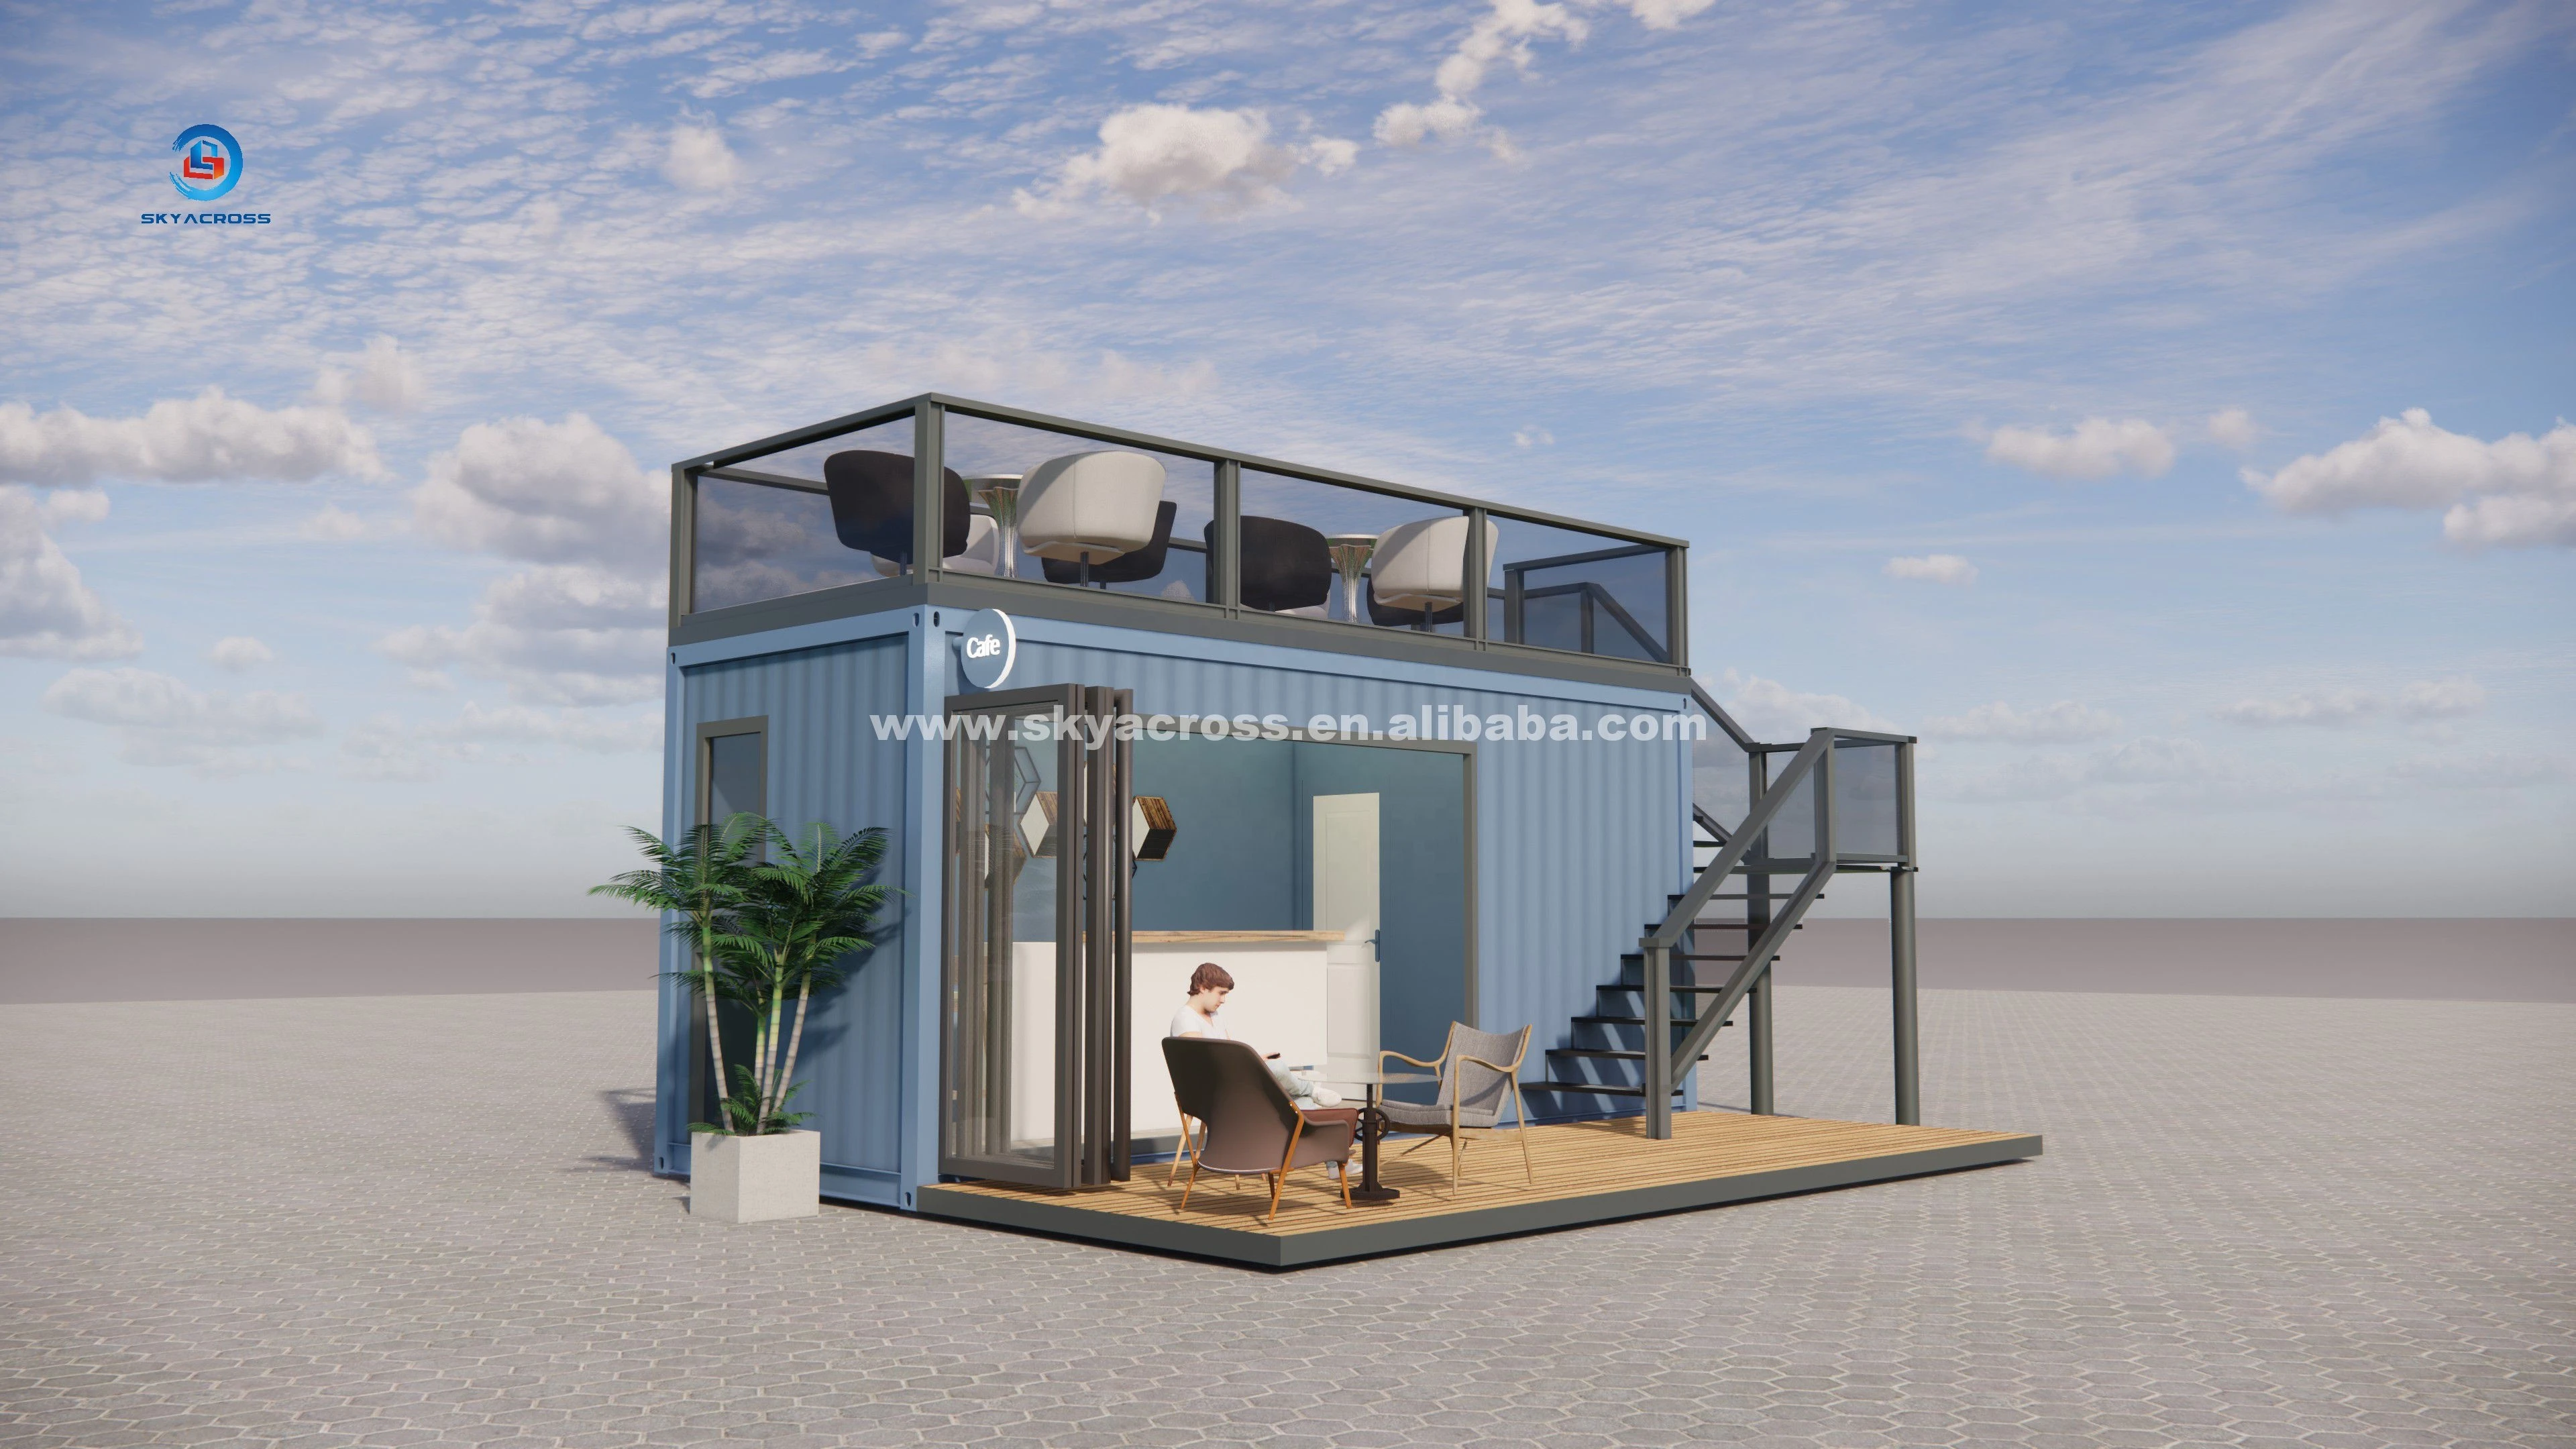 two-story Pop-up container coffee restaurant bar cafe Kiosk,Booth Use steel prefabricated houses blue color